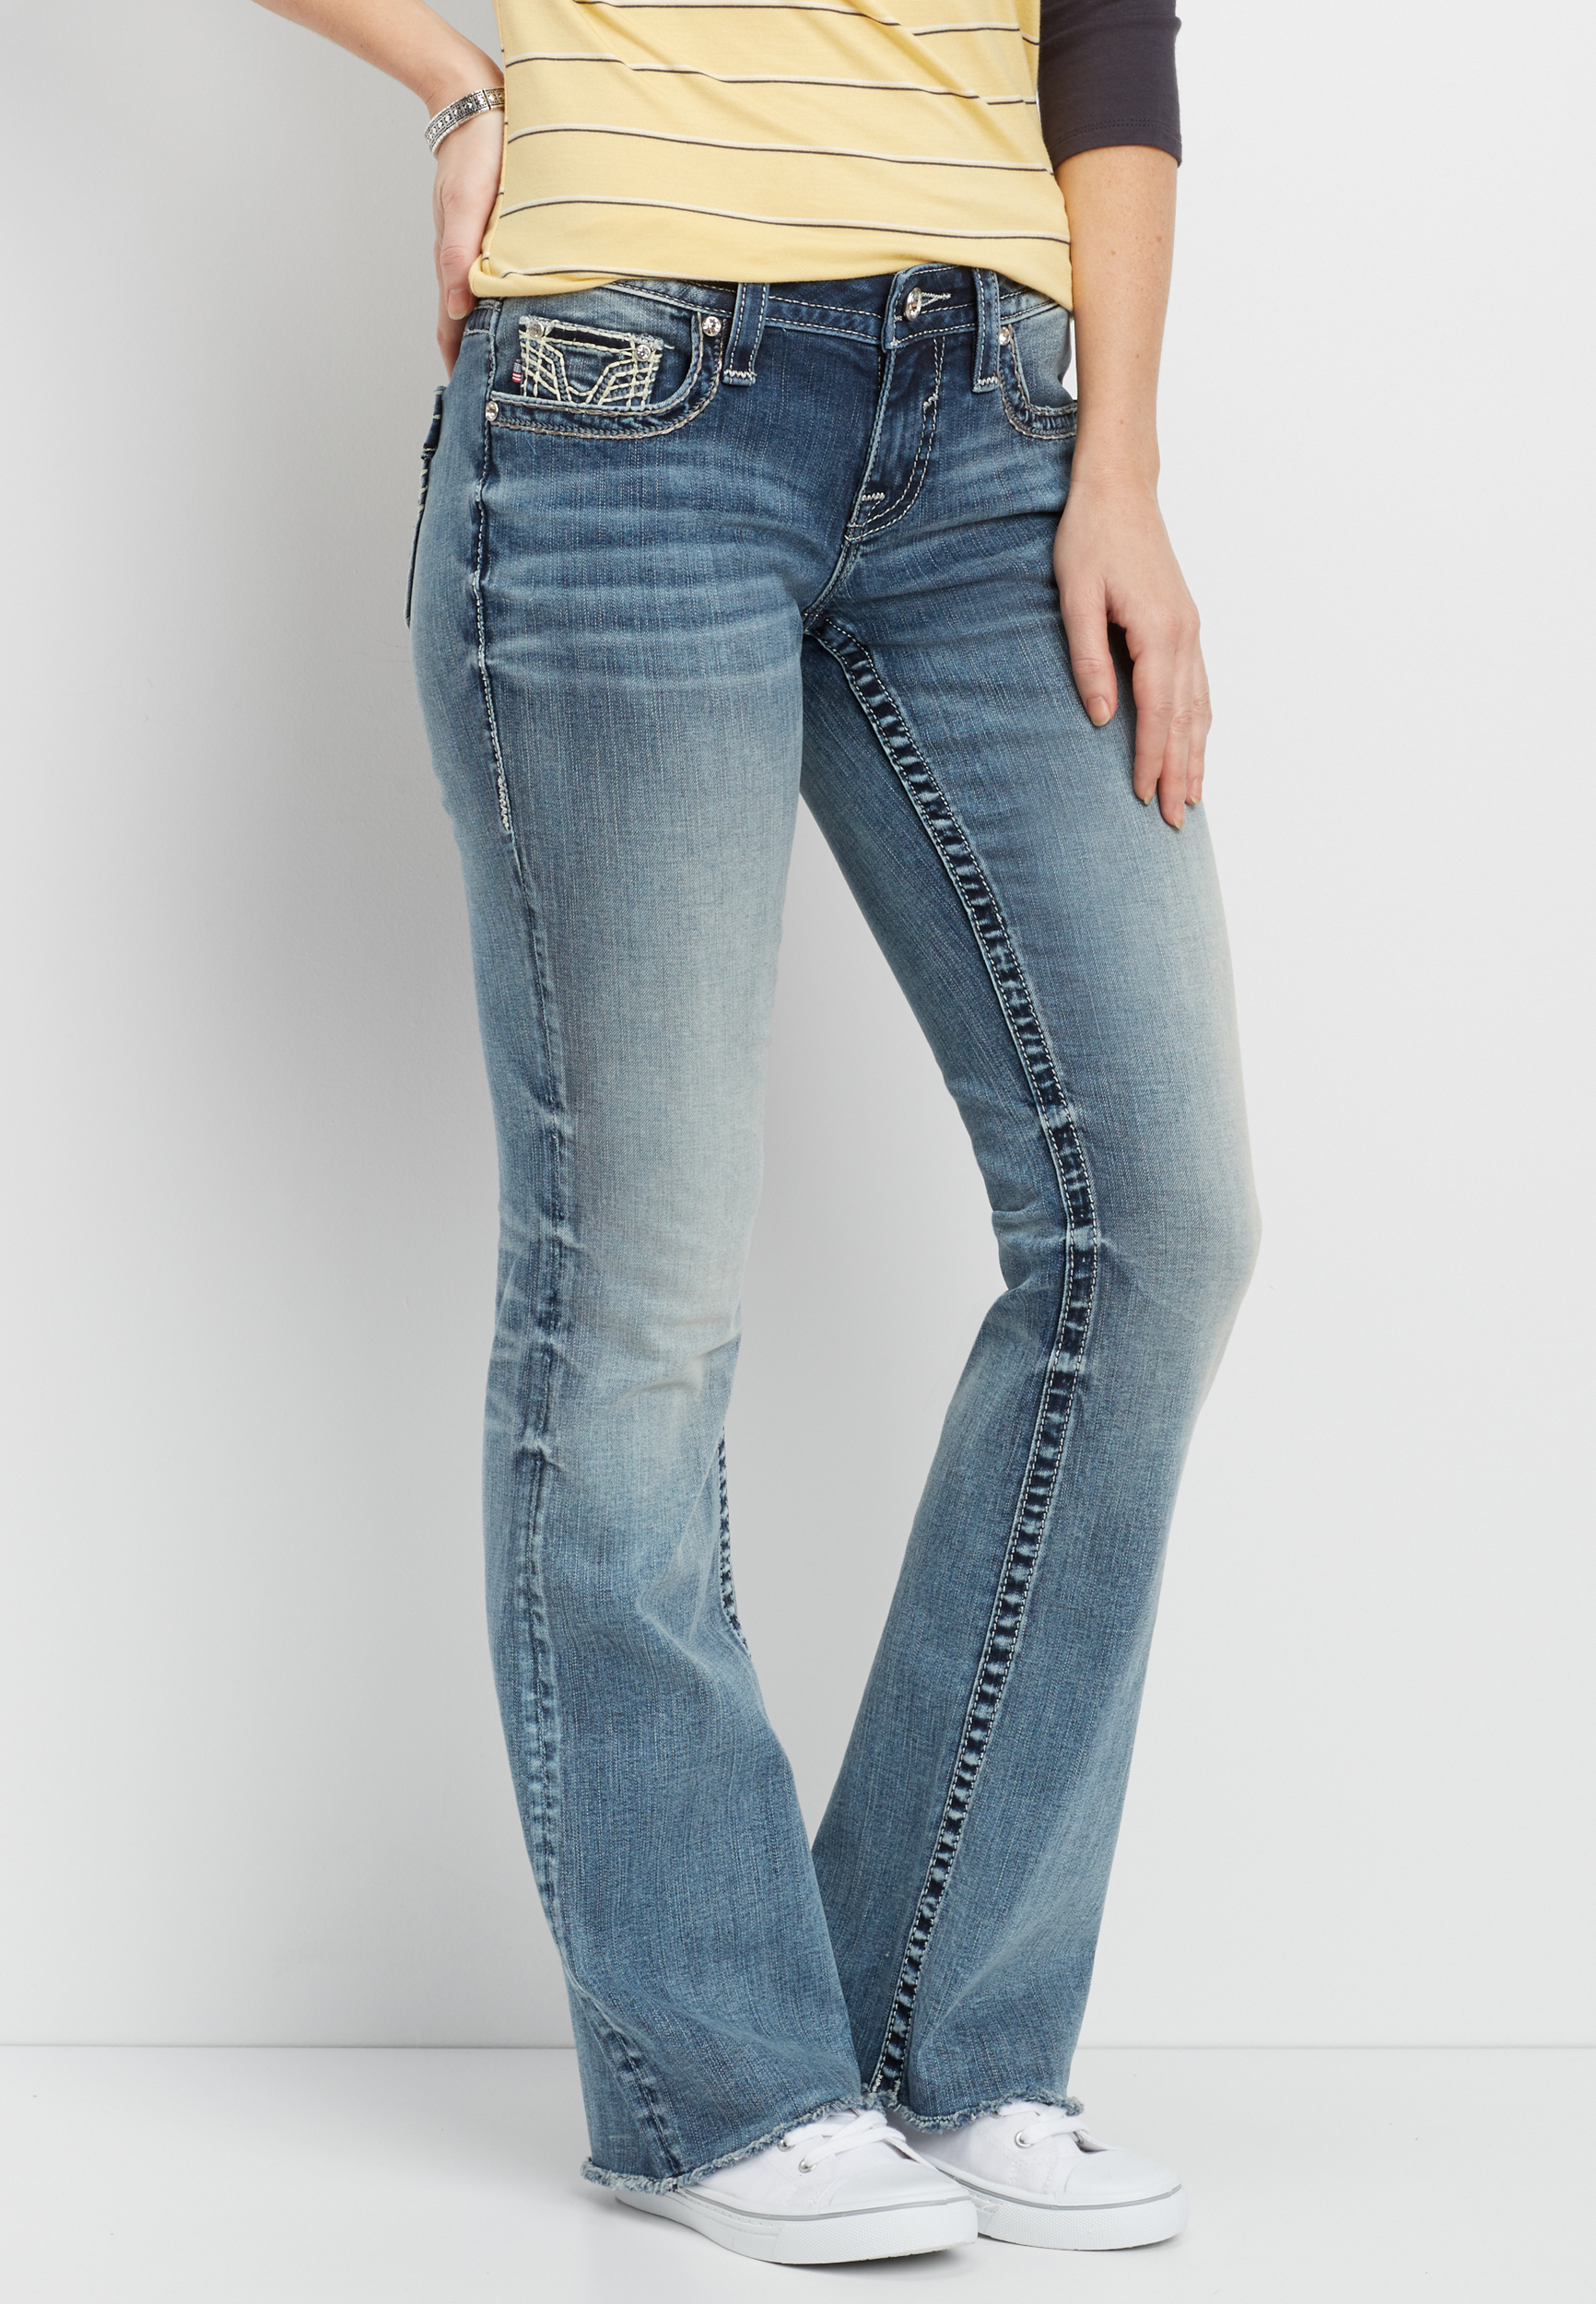 bootcut jeans with jewels